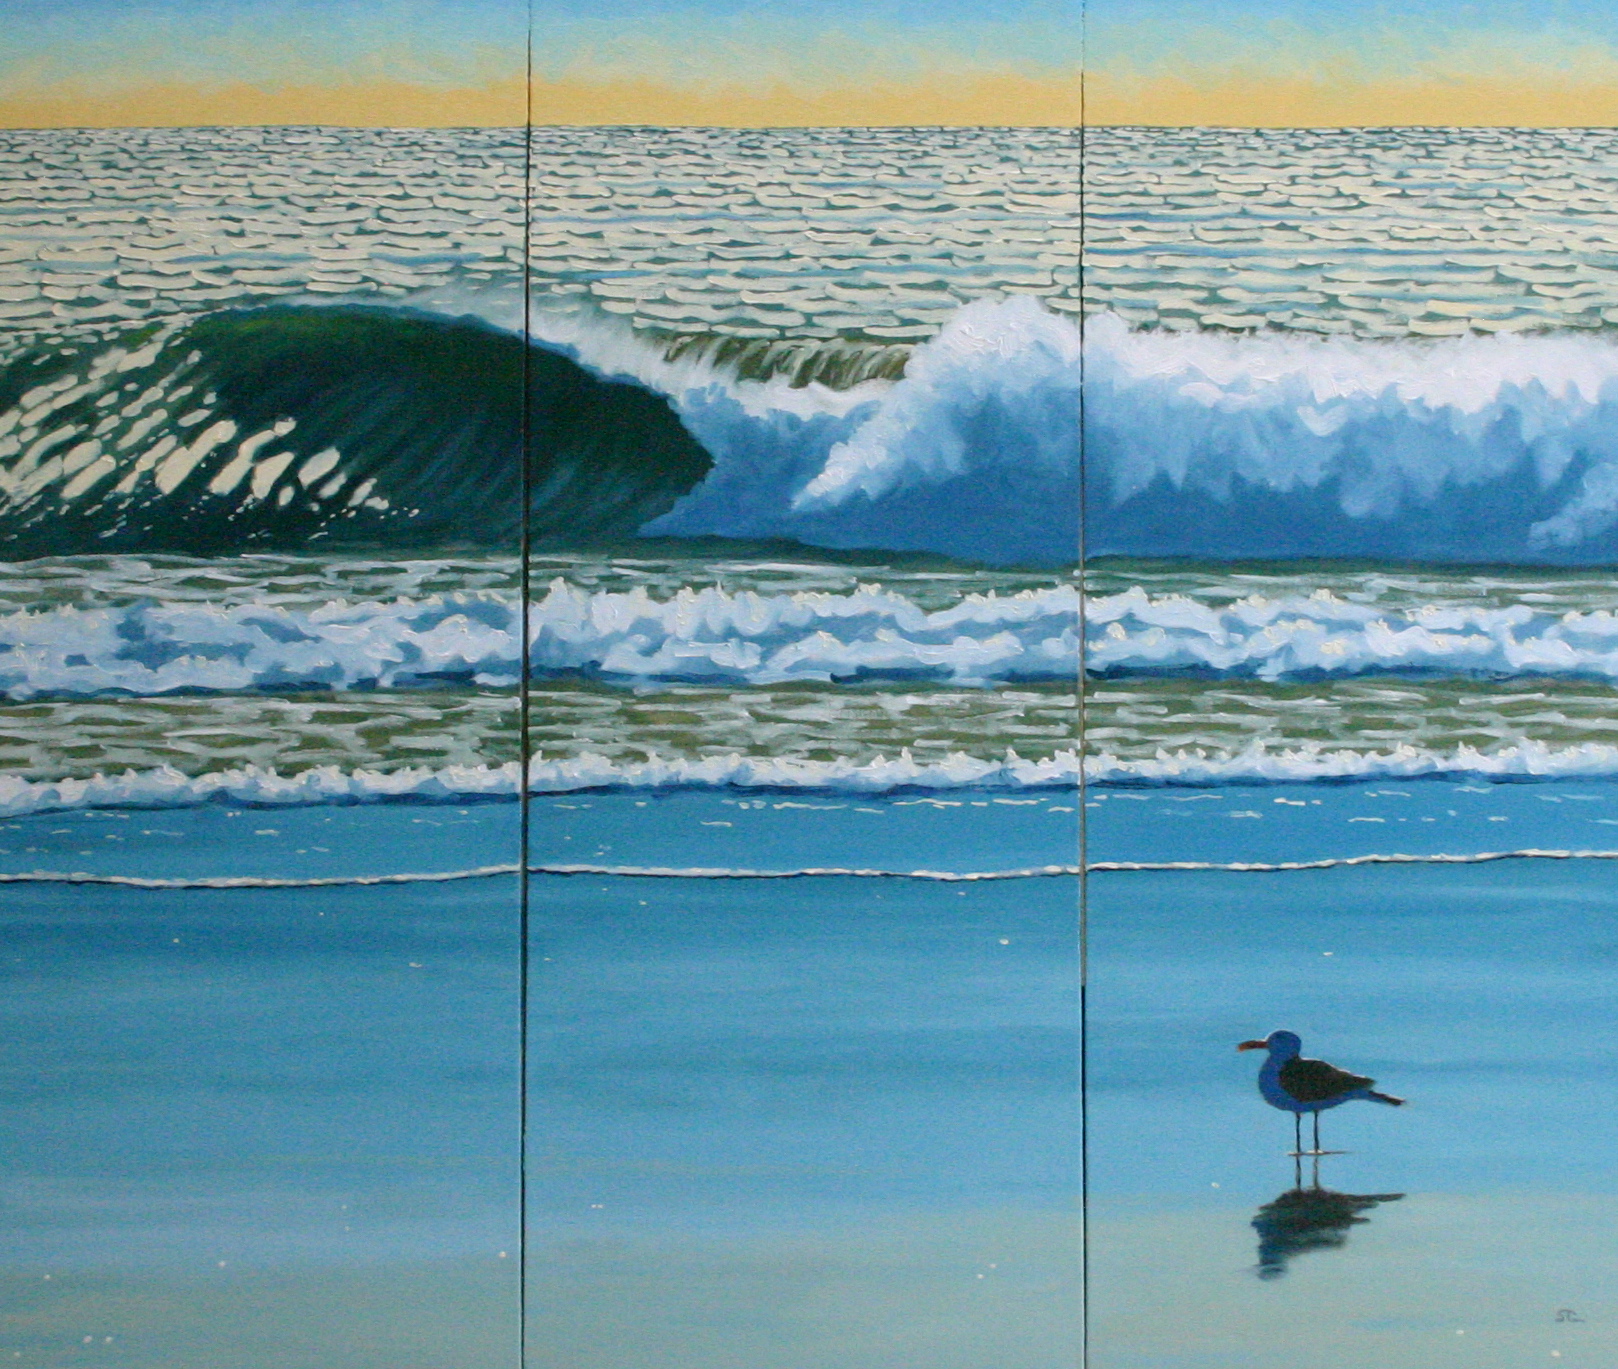 "In my Other Life I was a Surfer" oil on canvas 36 x 36 triptych